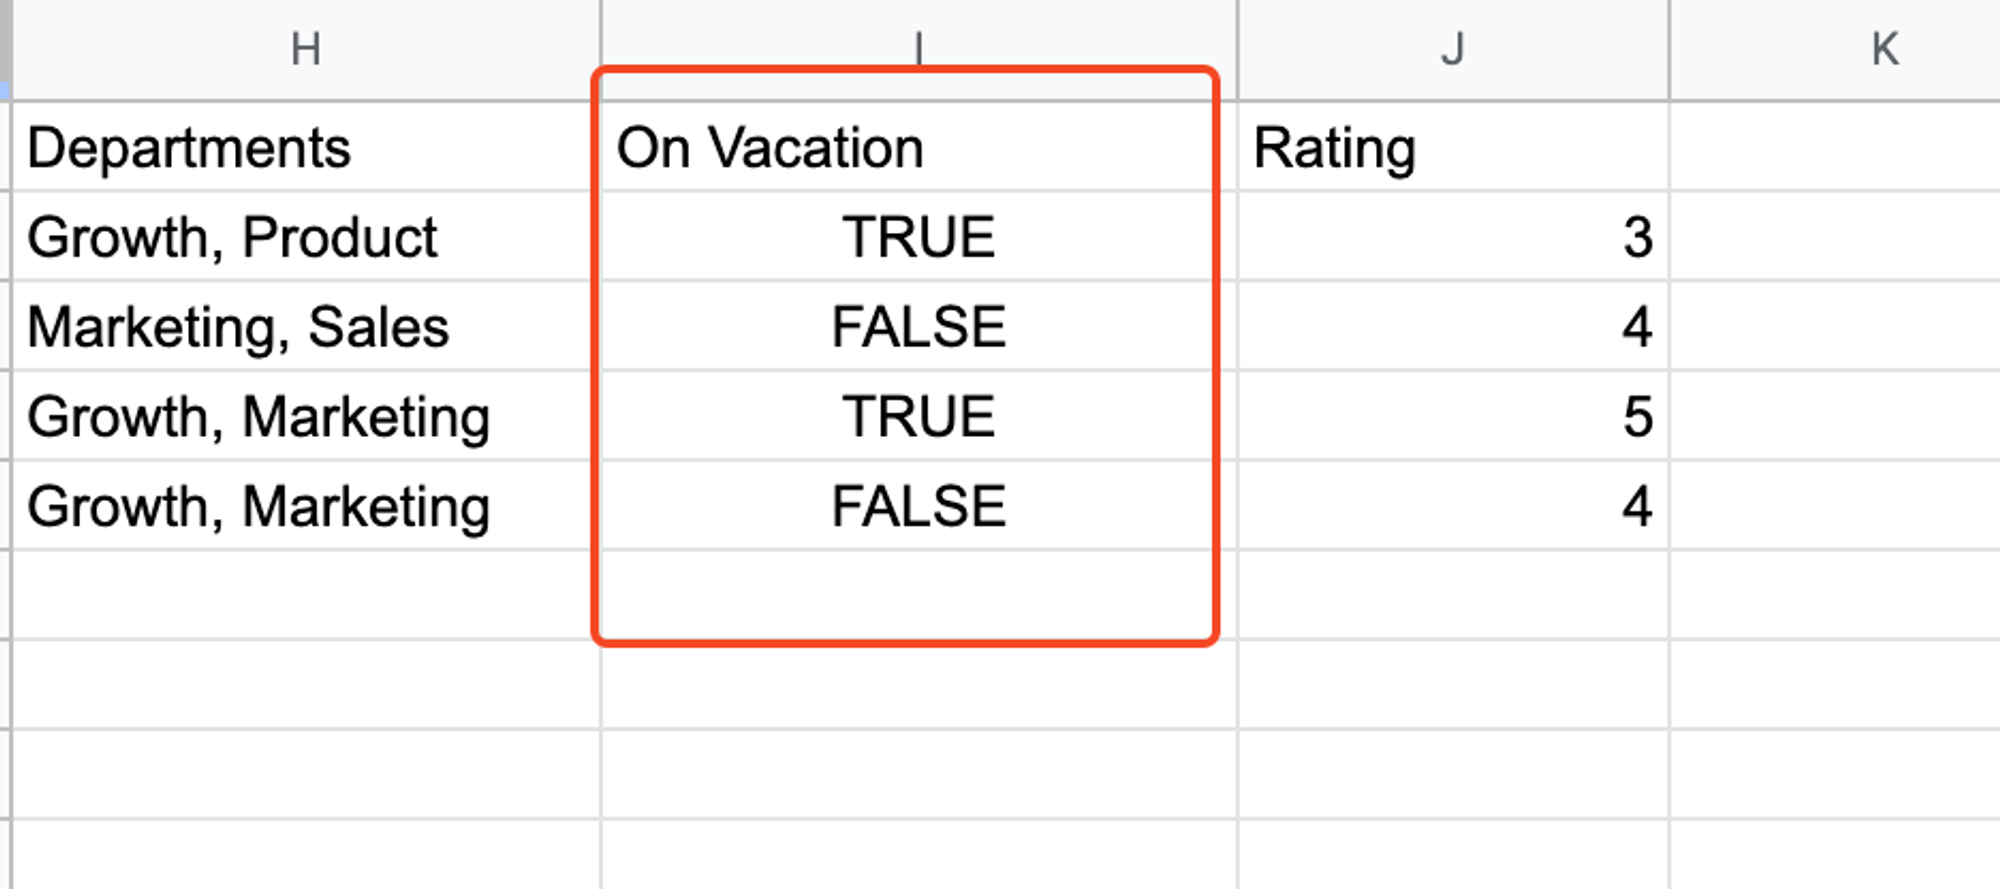 “On Vacation” column in Google Sheets